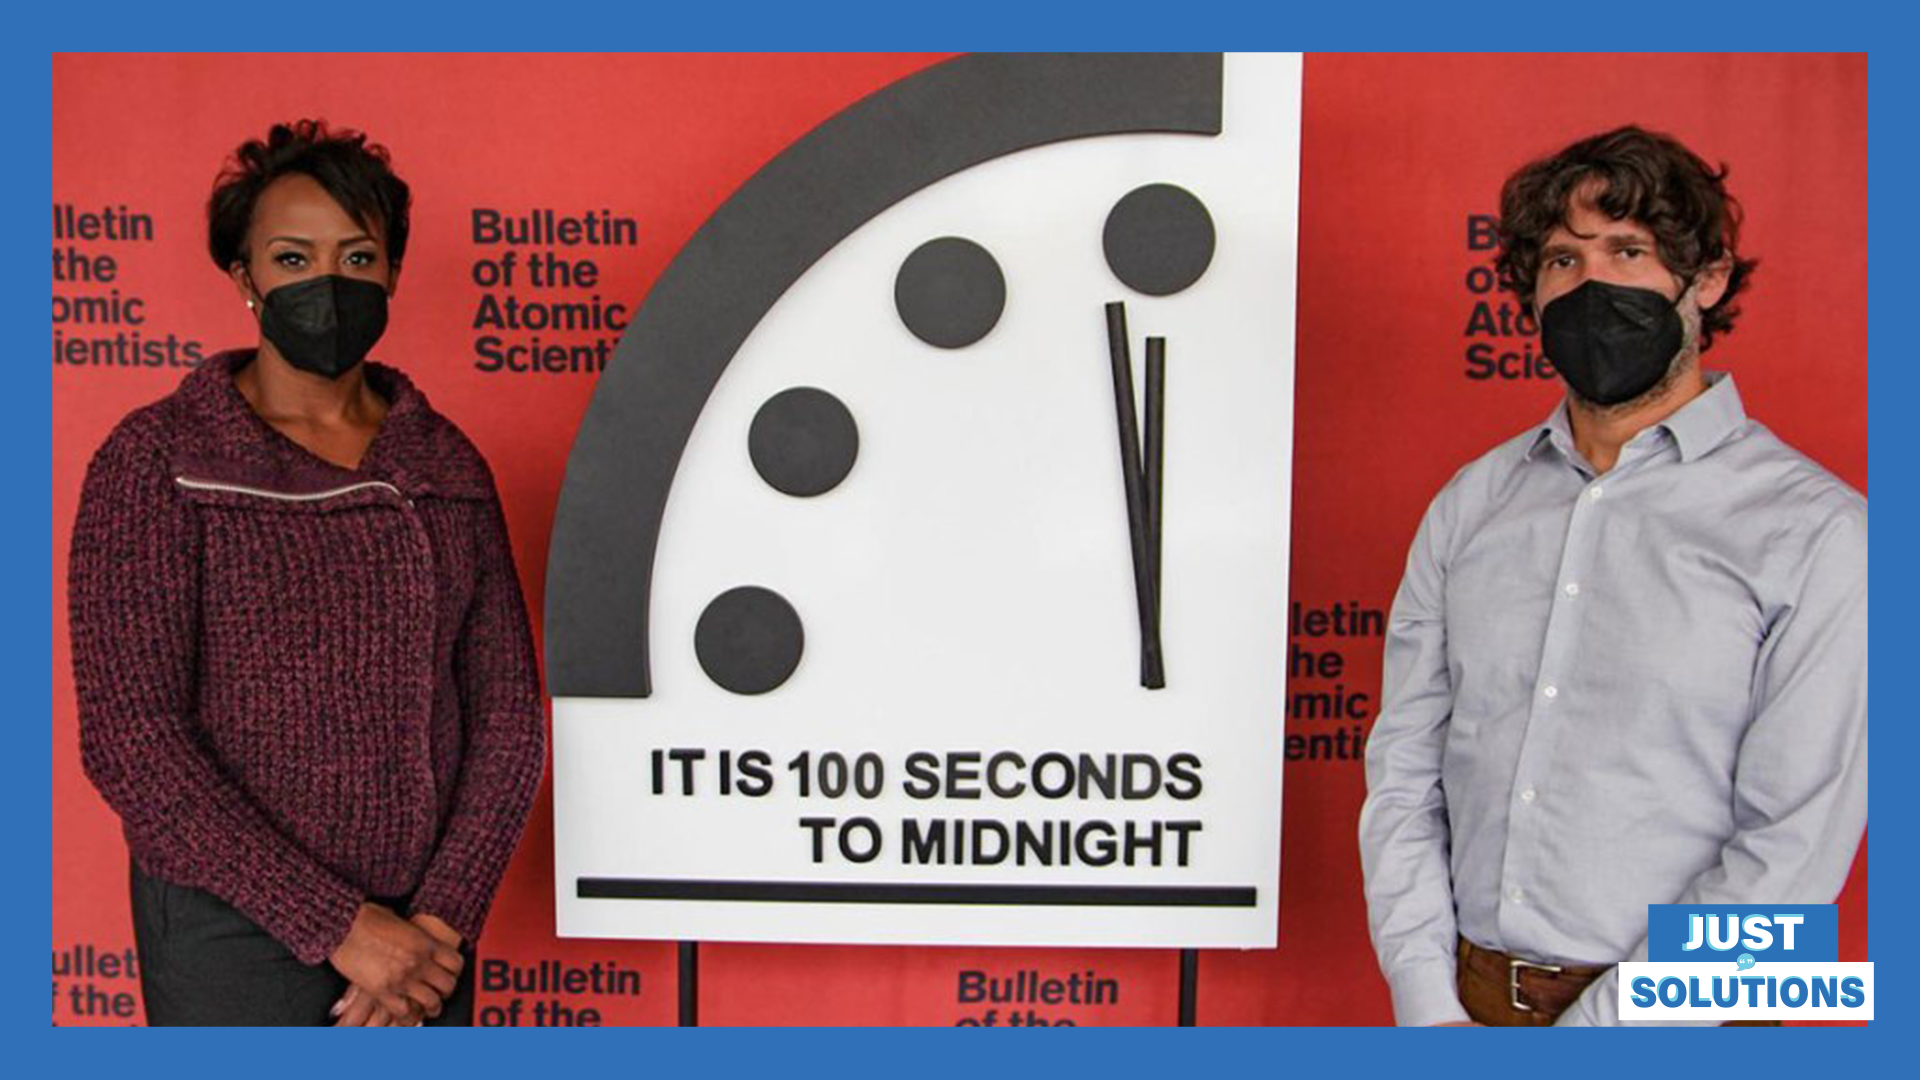 4 Main Issues That Keep Humanity at 100 Seconds to Midnight